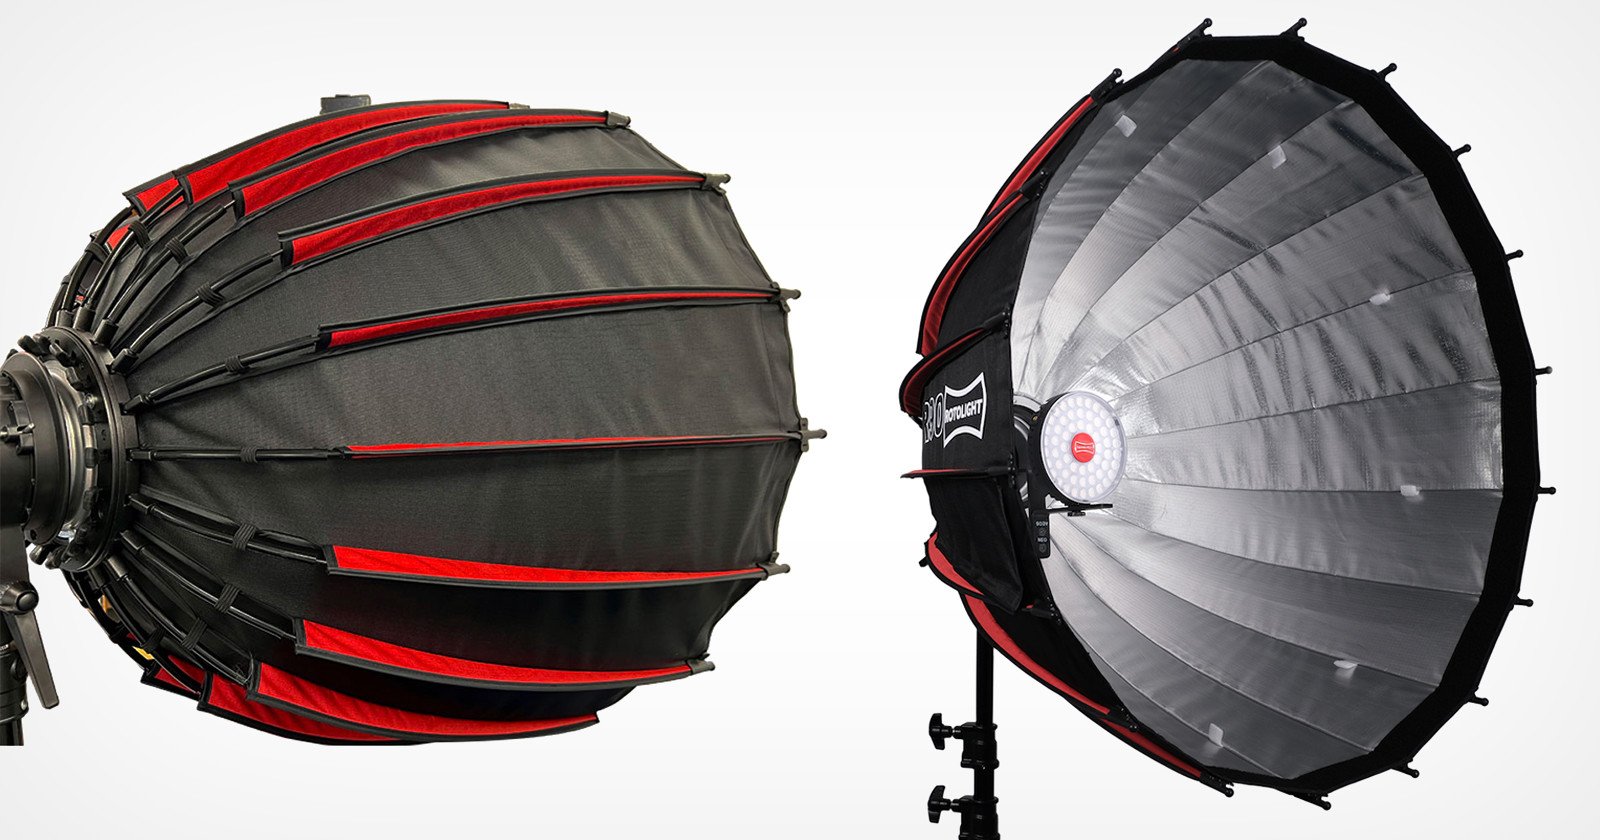 Rotolights New Parabolic Softboxes are a Bit Confusing